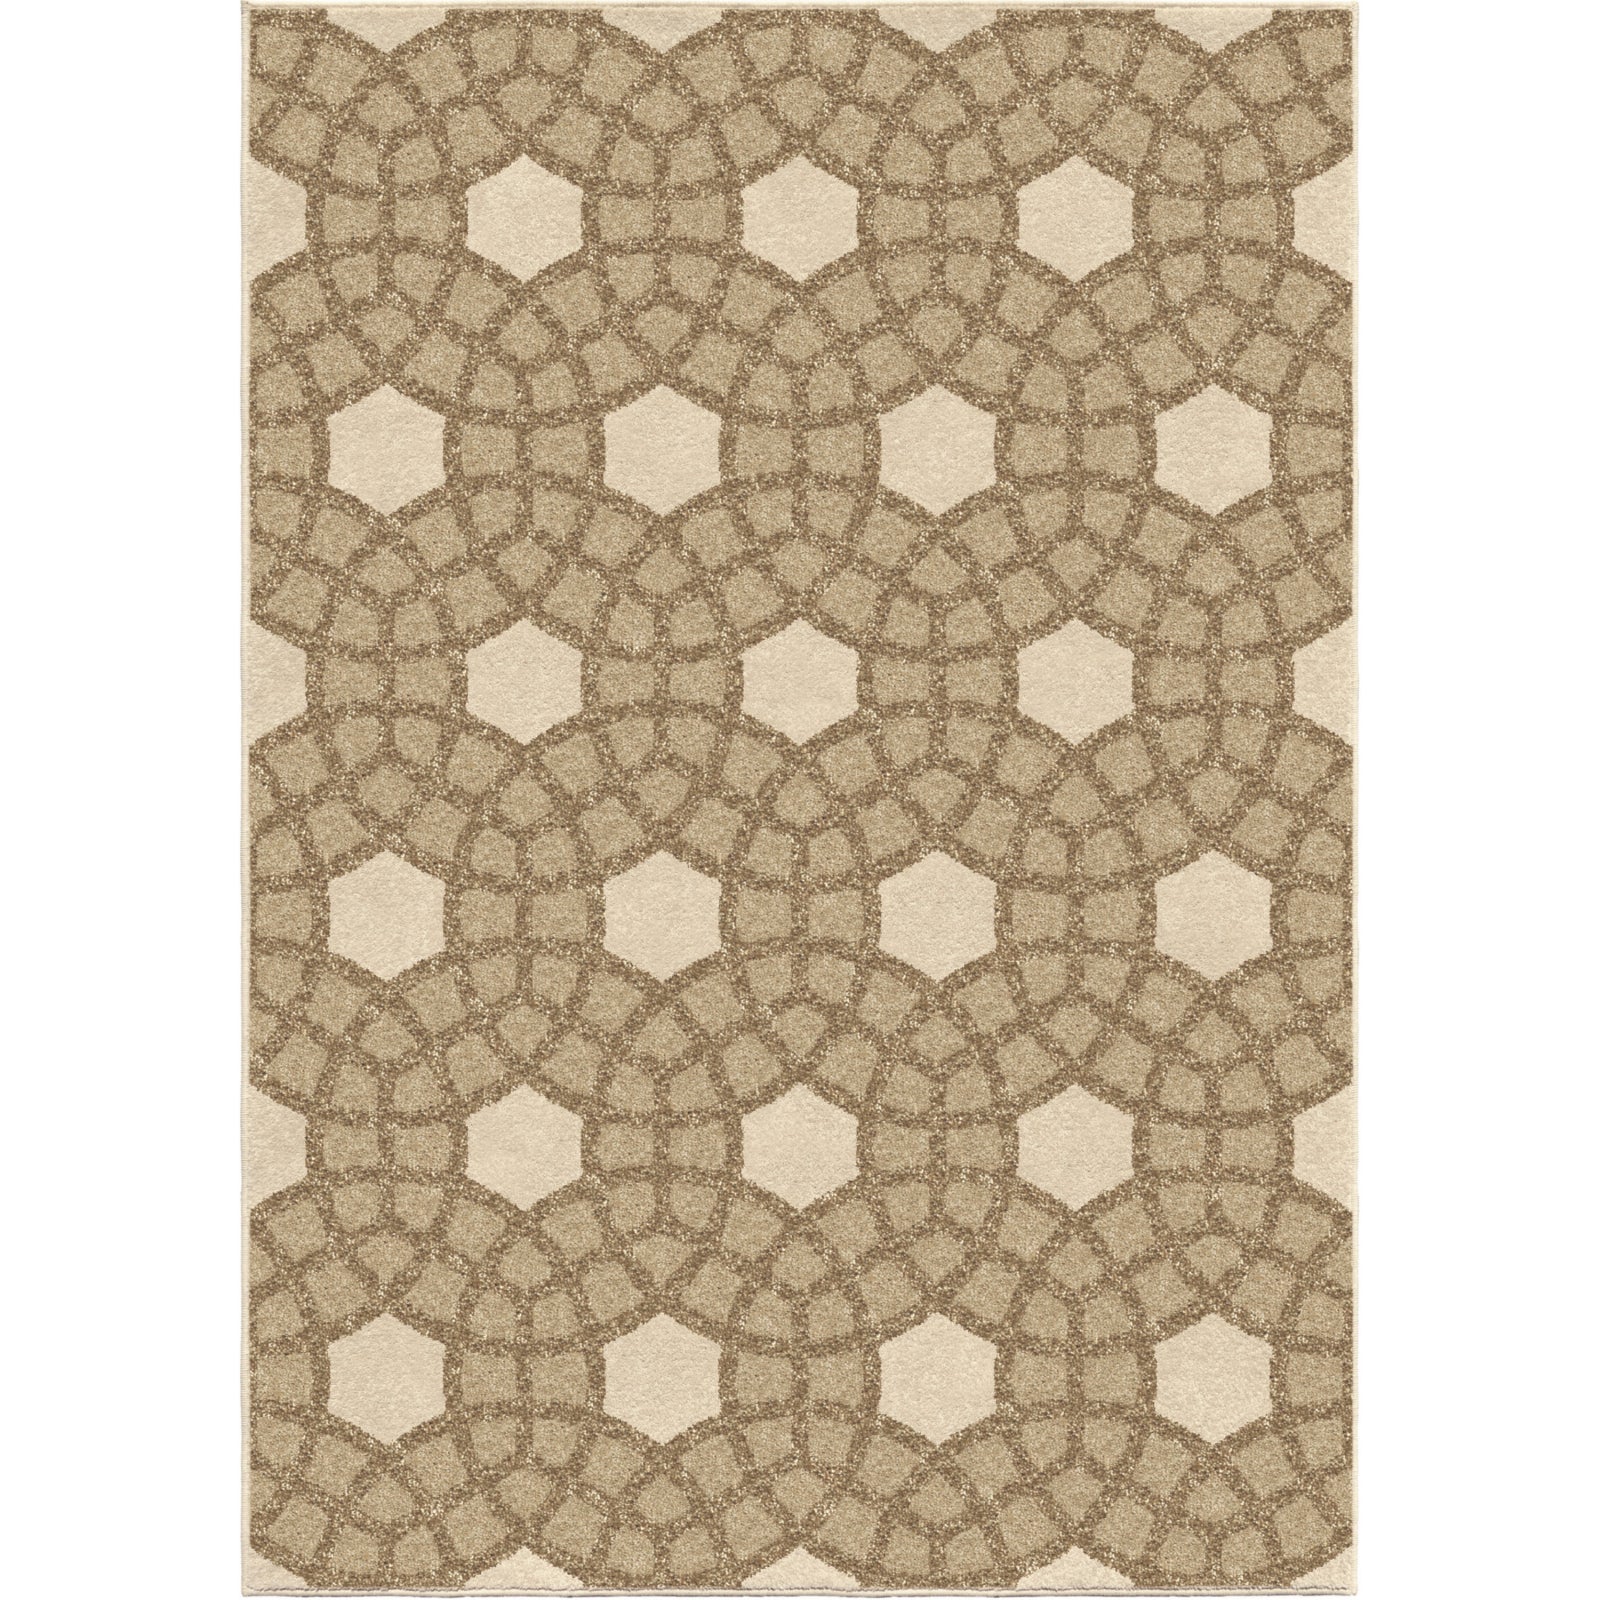 Orian Rugs Napa Chainlink Fence Beige Area Rug main image